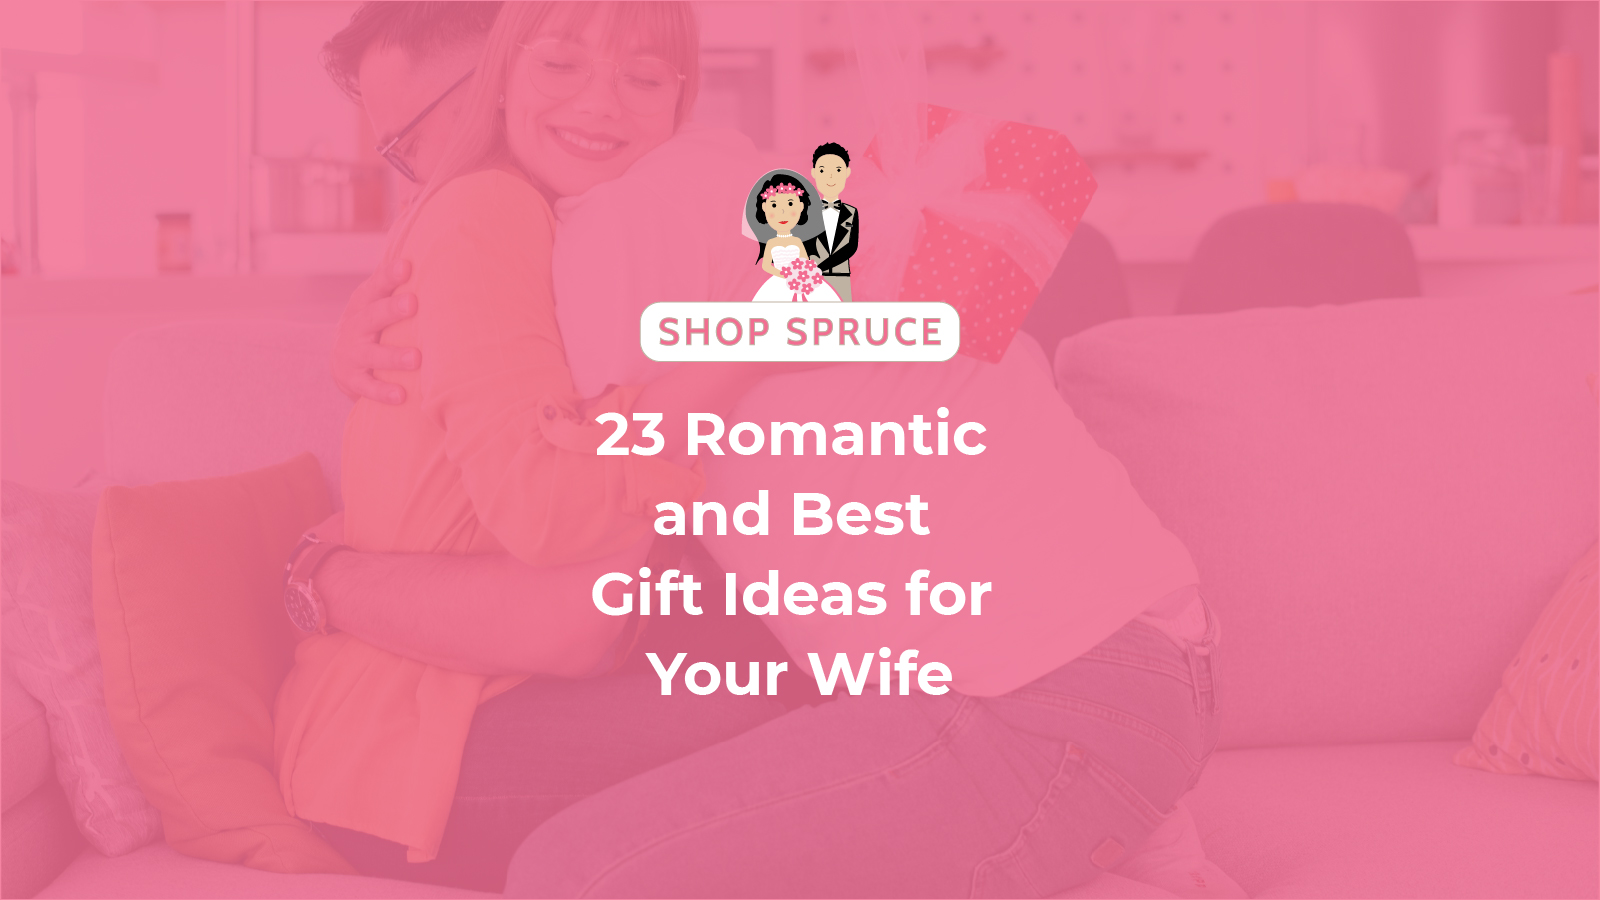 image with overlaid text on the best gift ideas for your wife